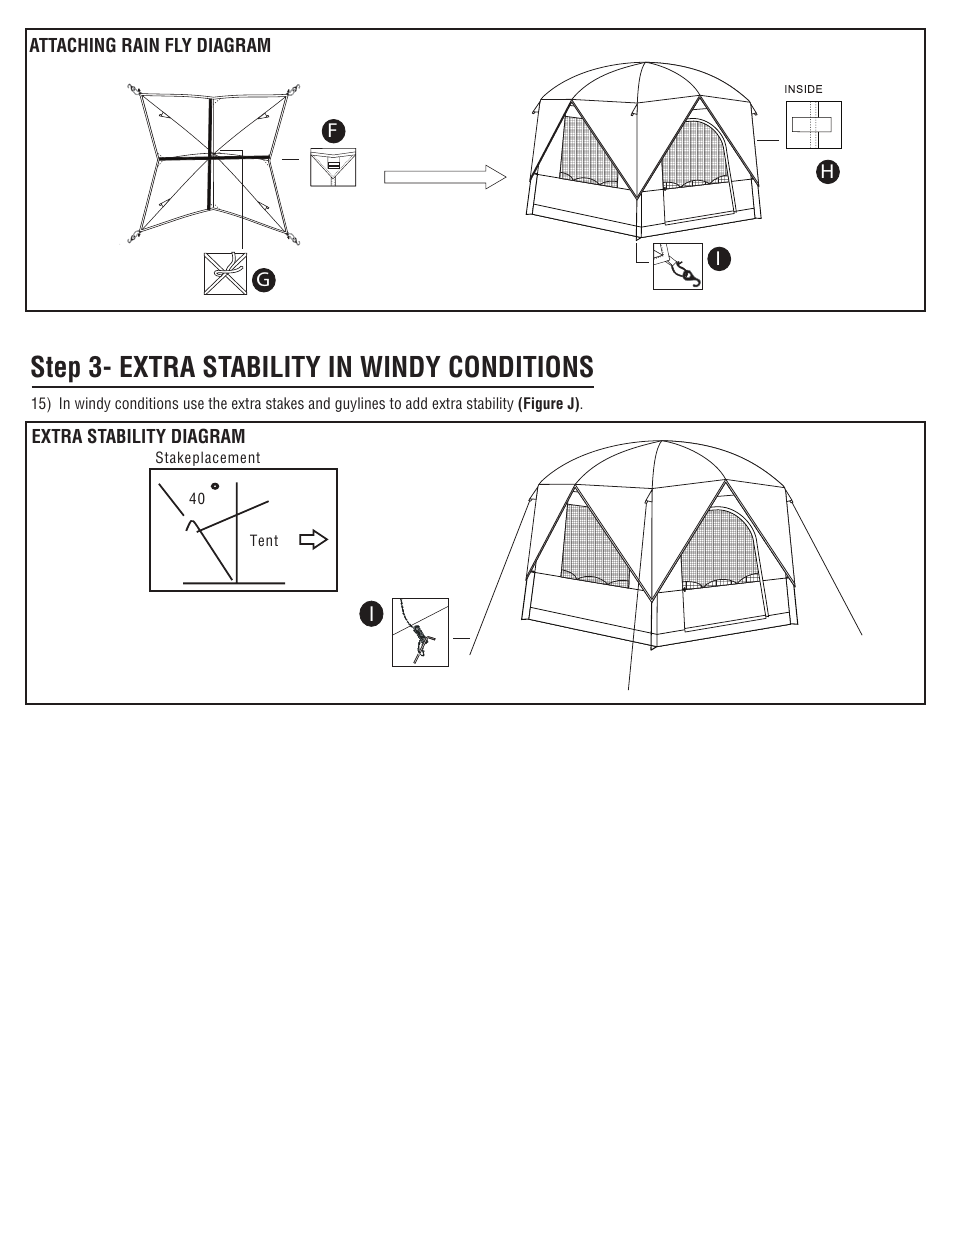 Step 3- extra stability in windy conditions | Giga Tent FT 054 User Manual | Page 3 / 8